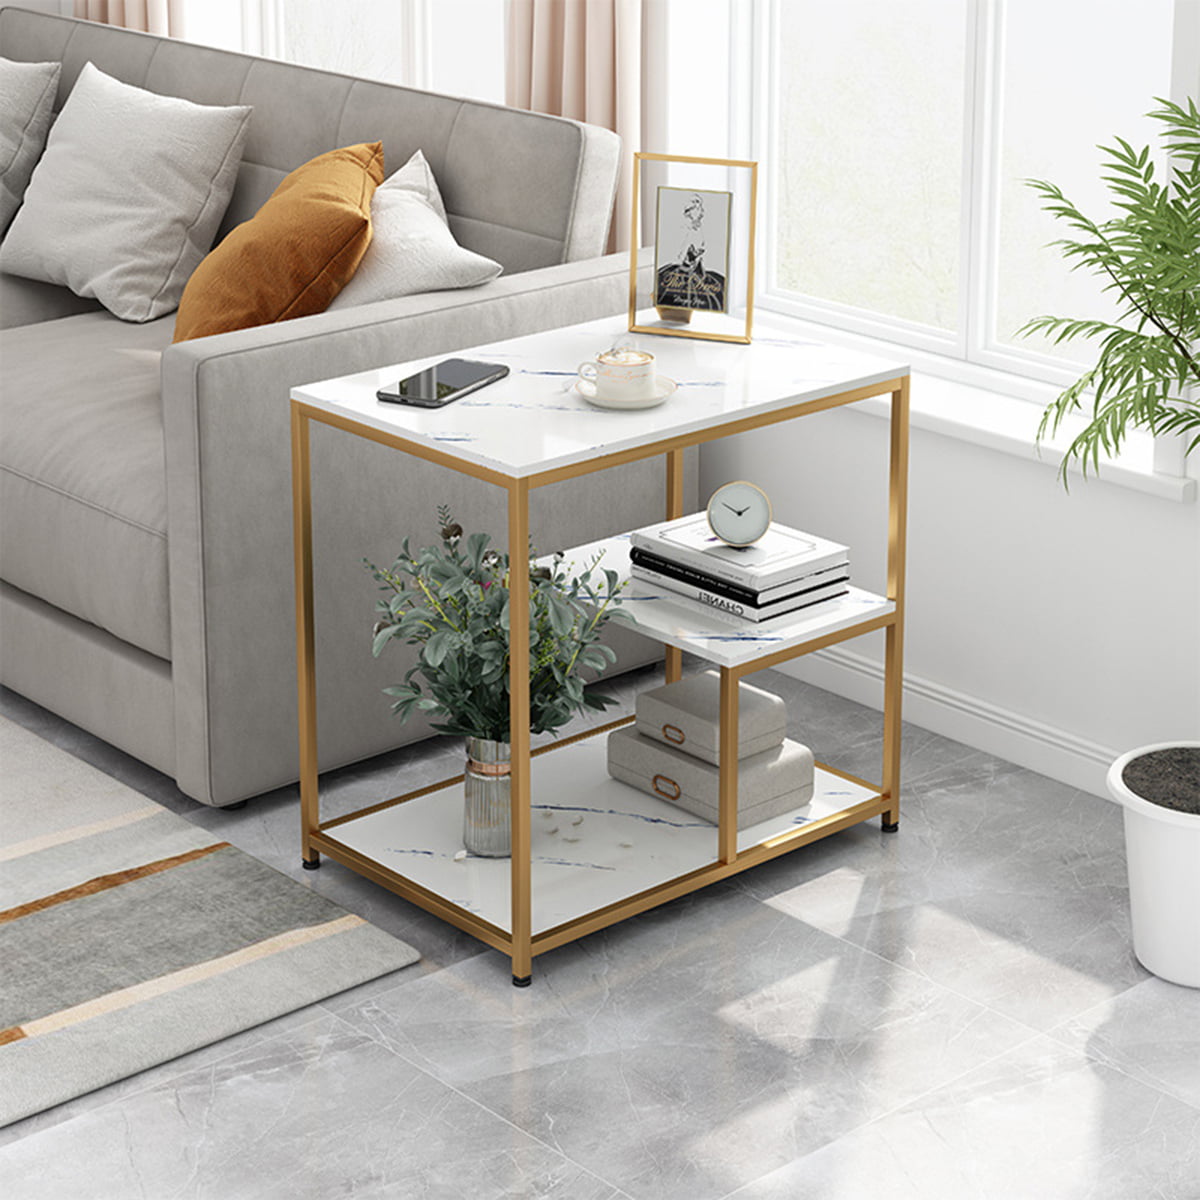 Coffee Table Nordic Style Side End Table Durable Metal Frame Furniture Small Space Tea Corner Table for Living Room Bedroom Patio Garden Black